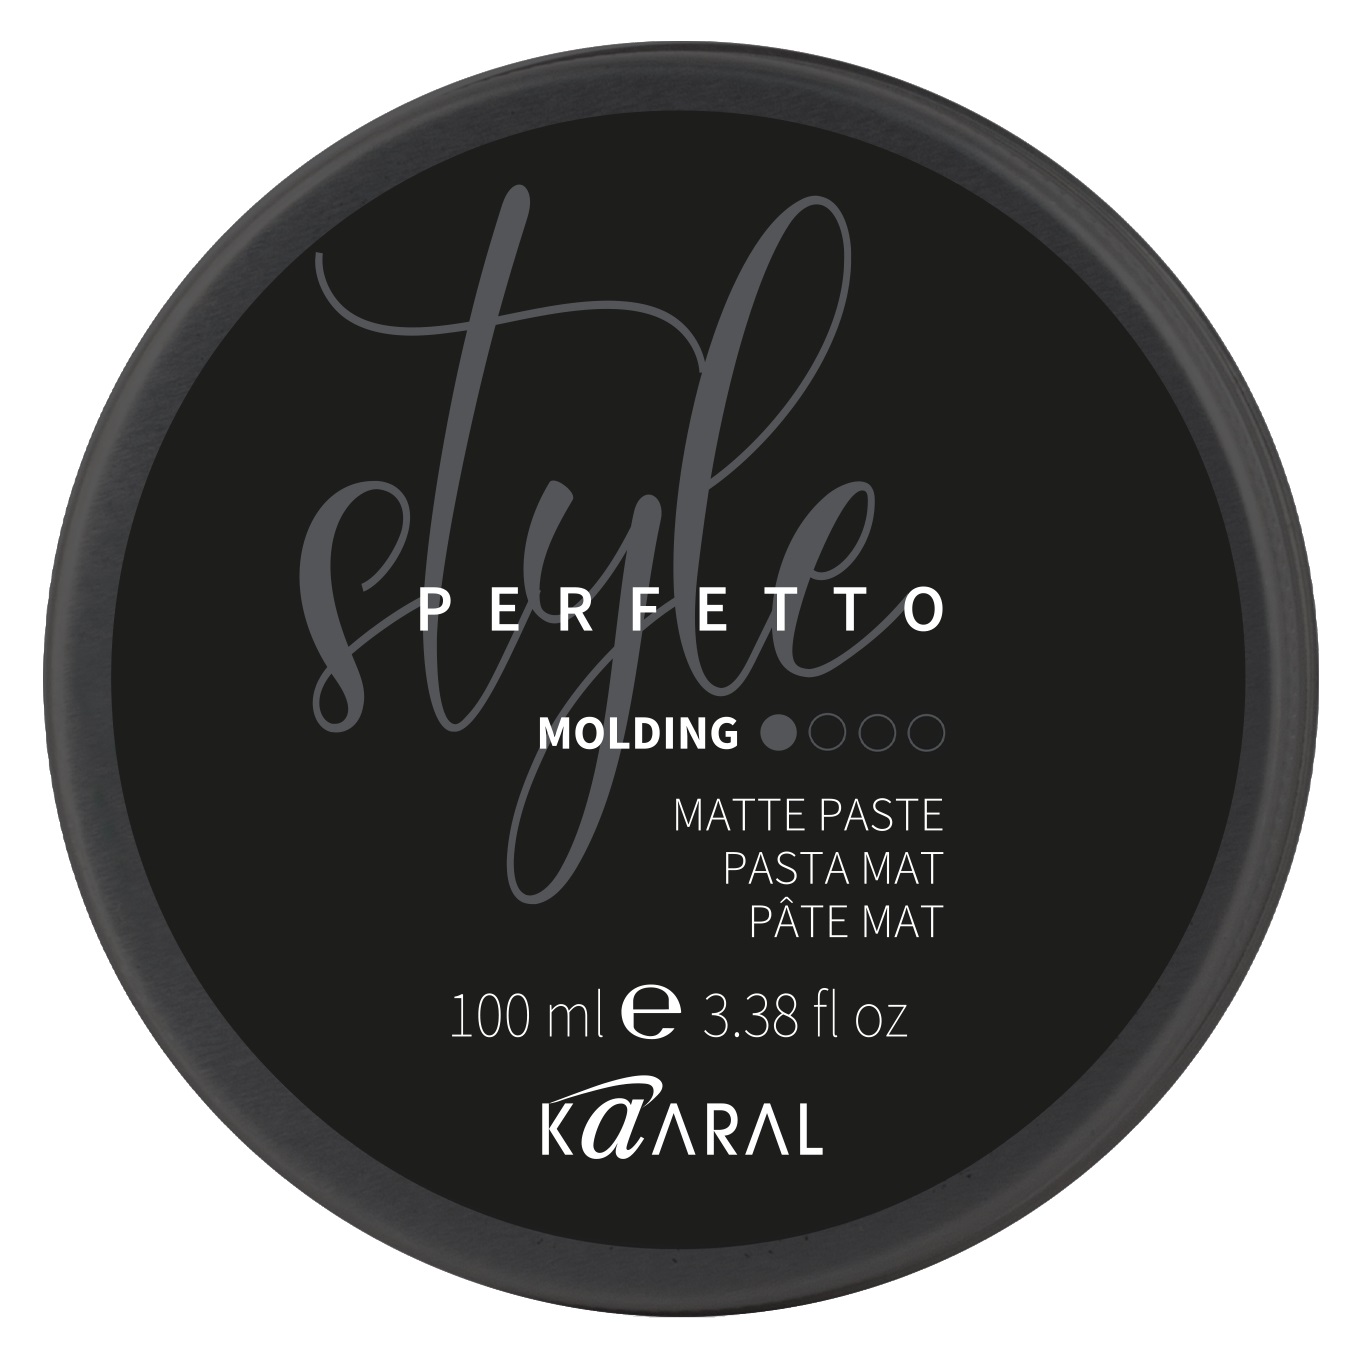 Kaaral Матовая паста Molding Matte Paste, 100 мл (Kaaral, Style Perfetto) матовая паста для волос style perfetto molding matte paste 80мл